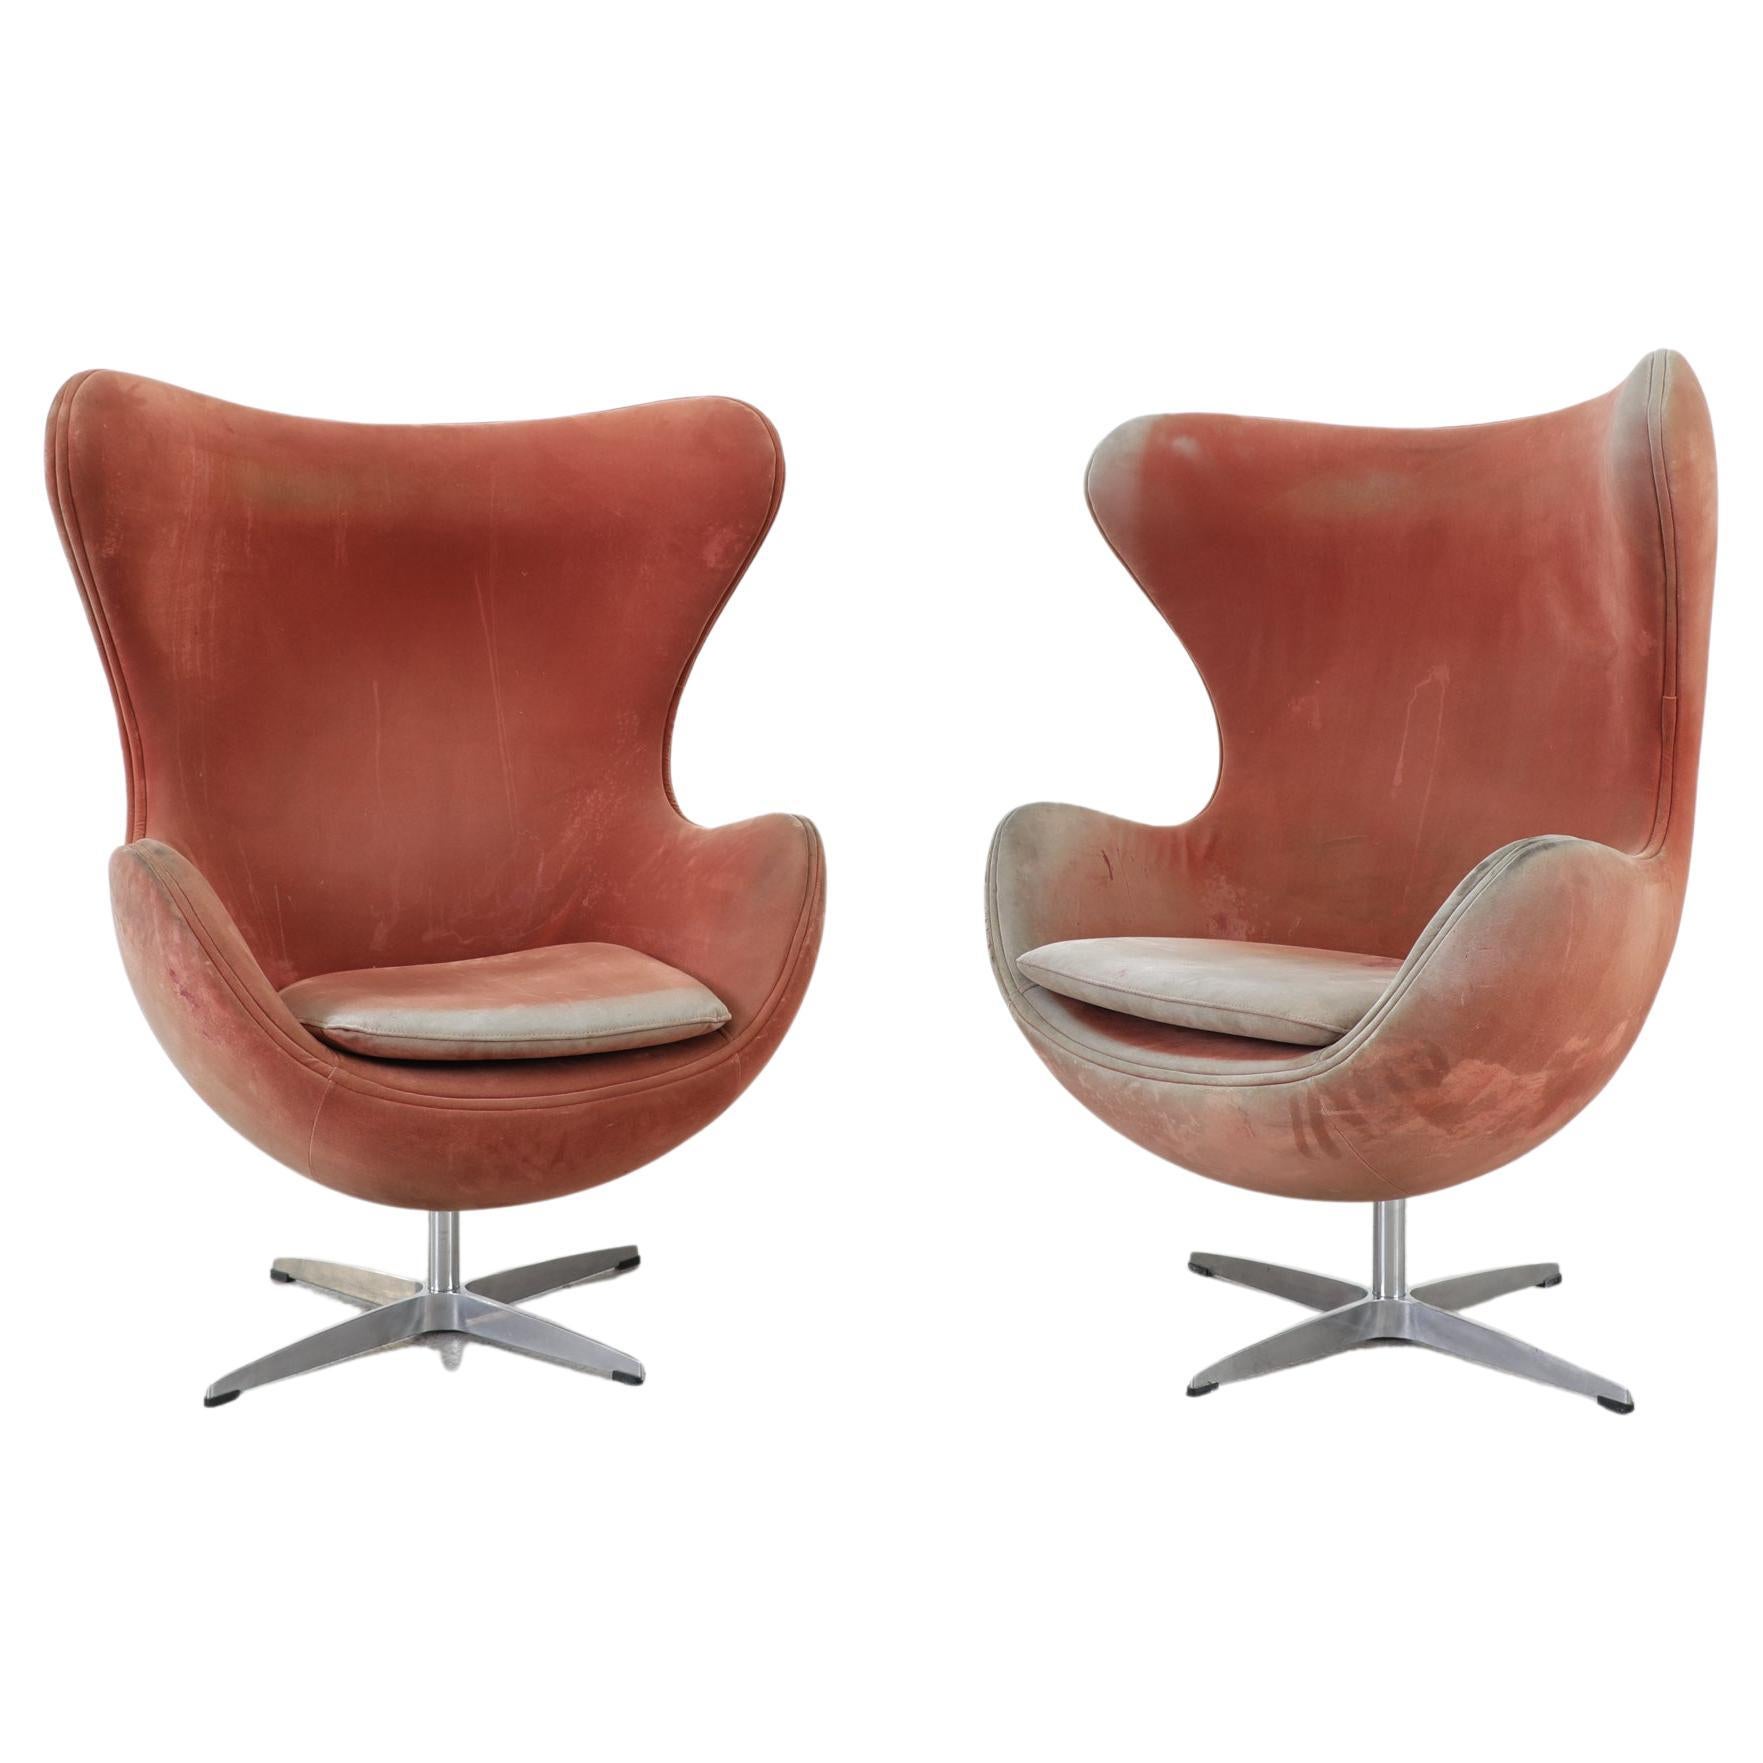 Pair of Original Arne Jacobsen (attributed) Egg Chairs, 1958